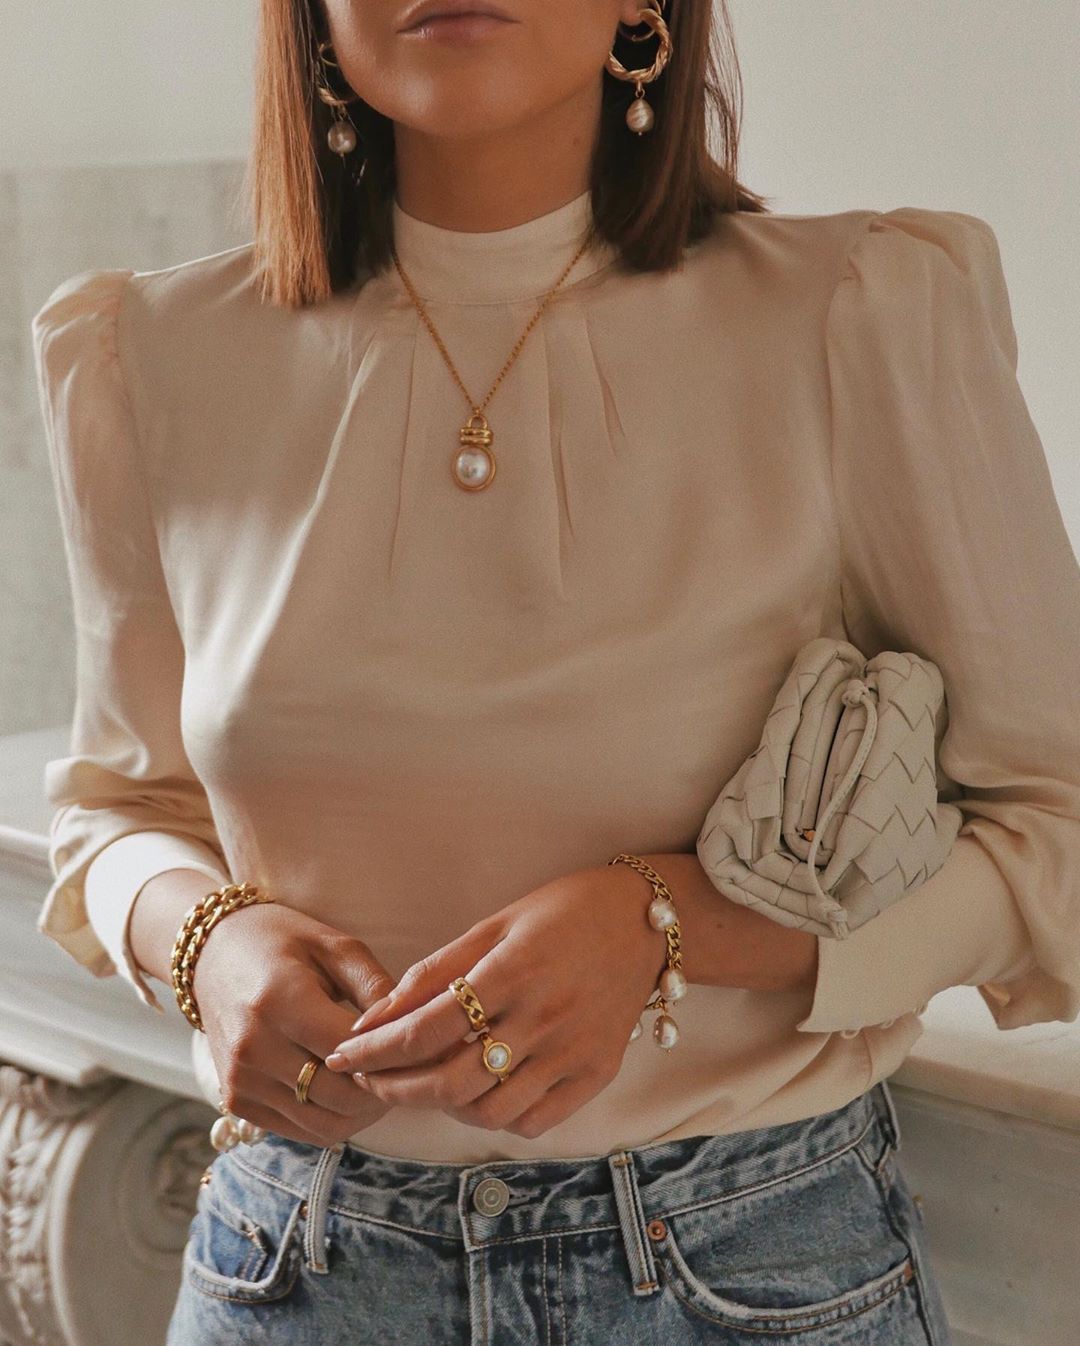 18 Under-$100 Blouses To Shop for Fall